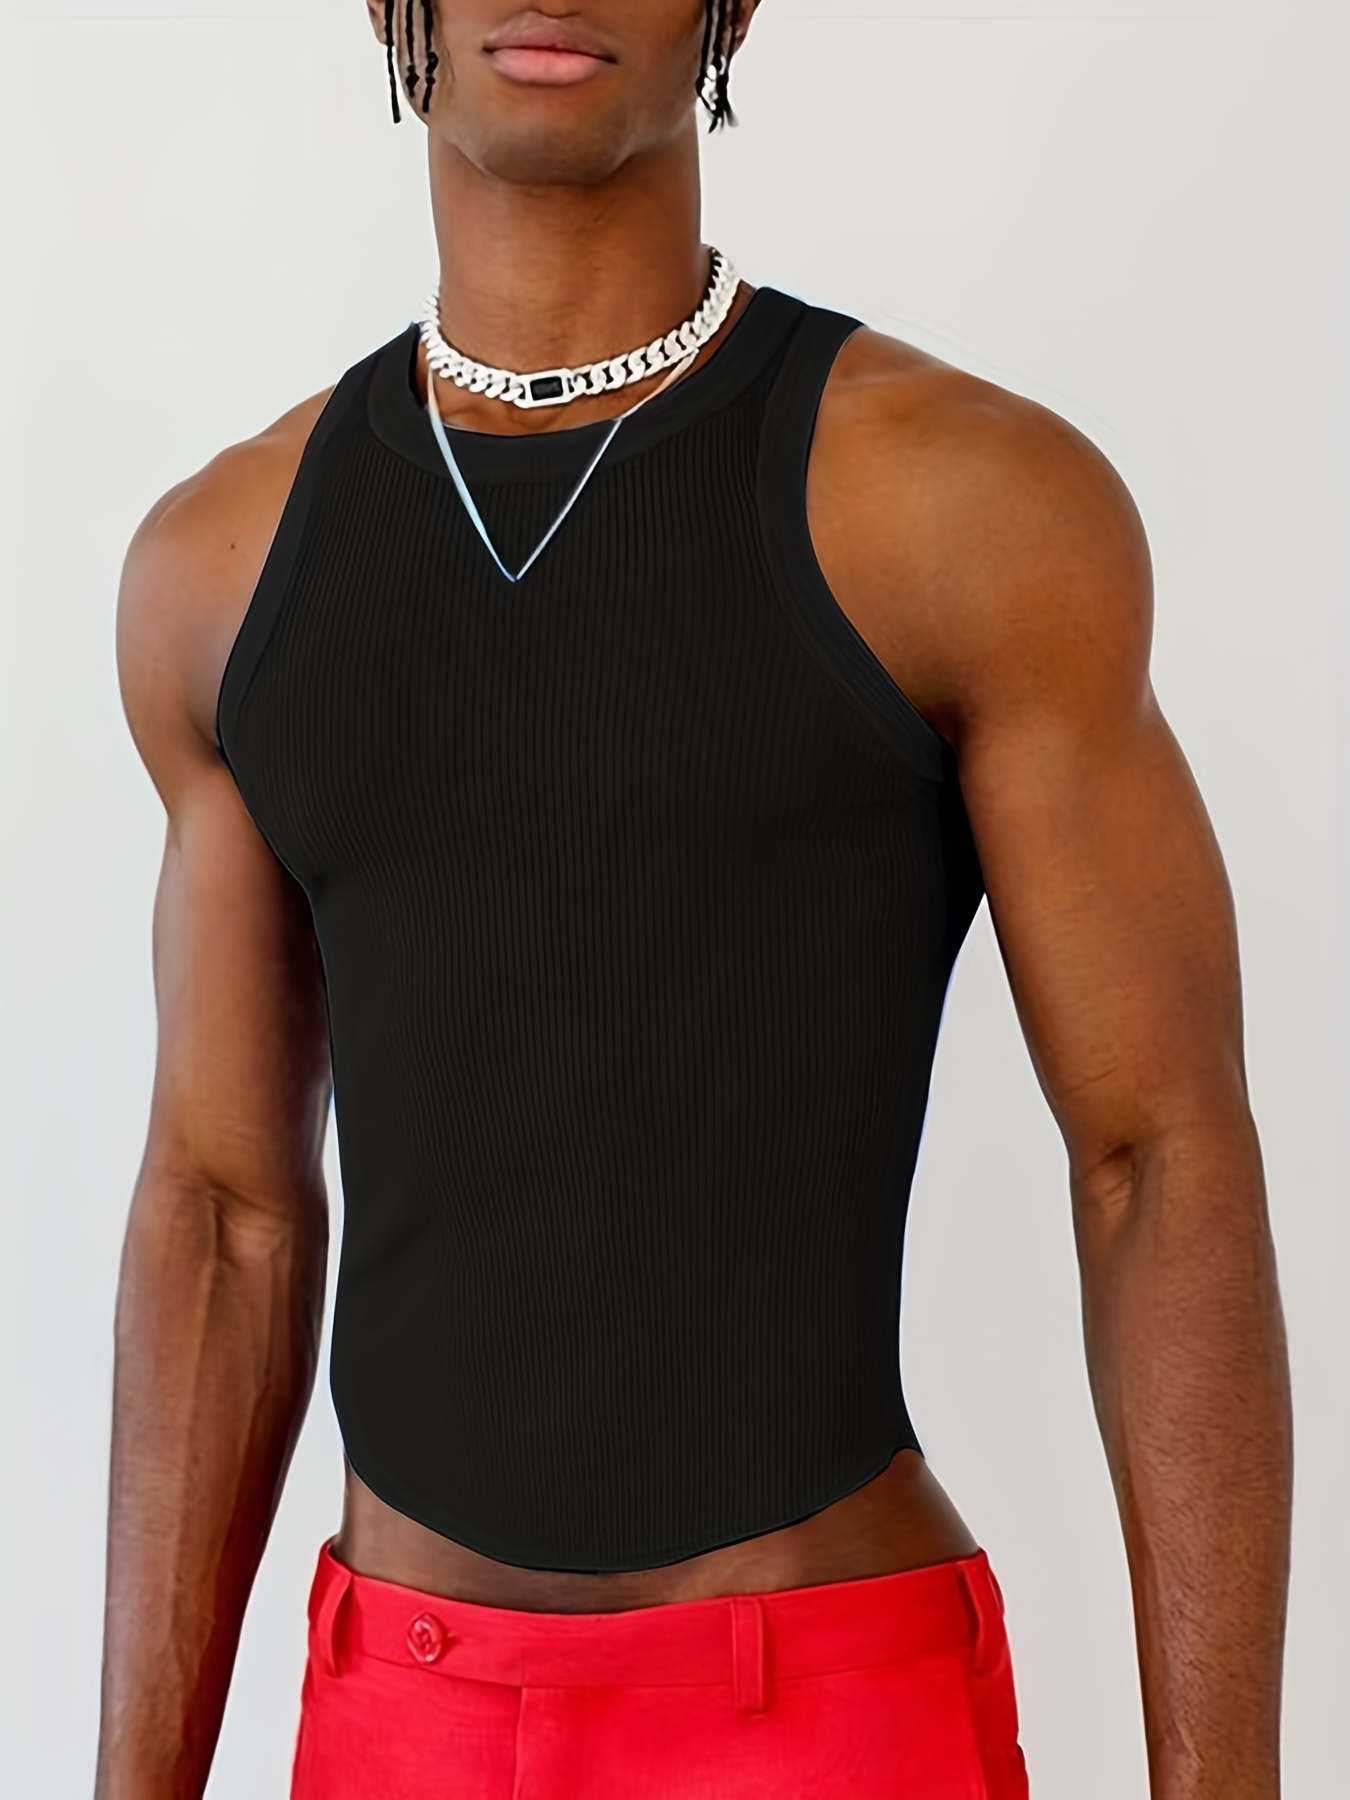 Men's Fashion Sleeveless Vest, Body Shaper Sexy Tight Tank Top Club Party  Outfits